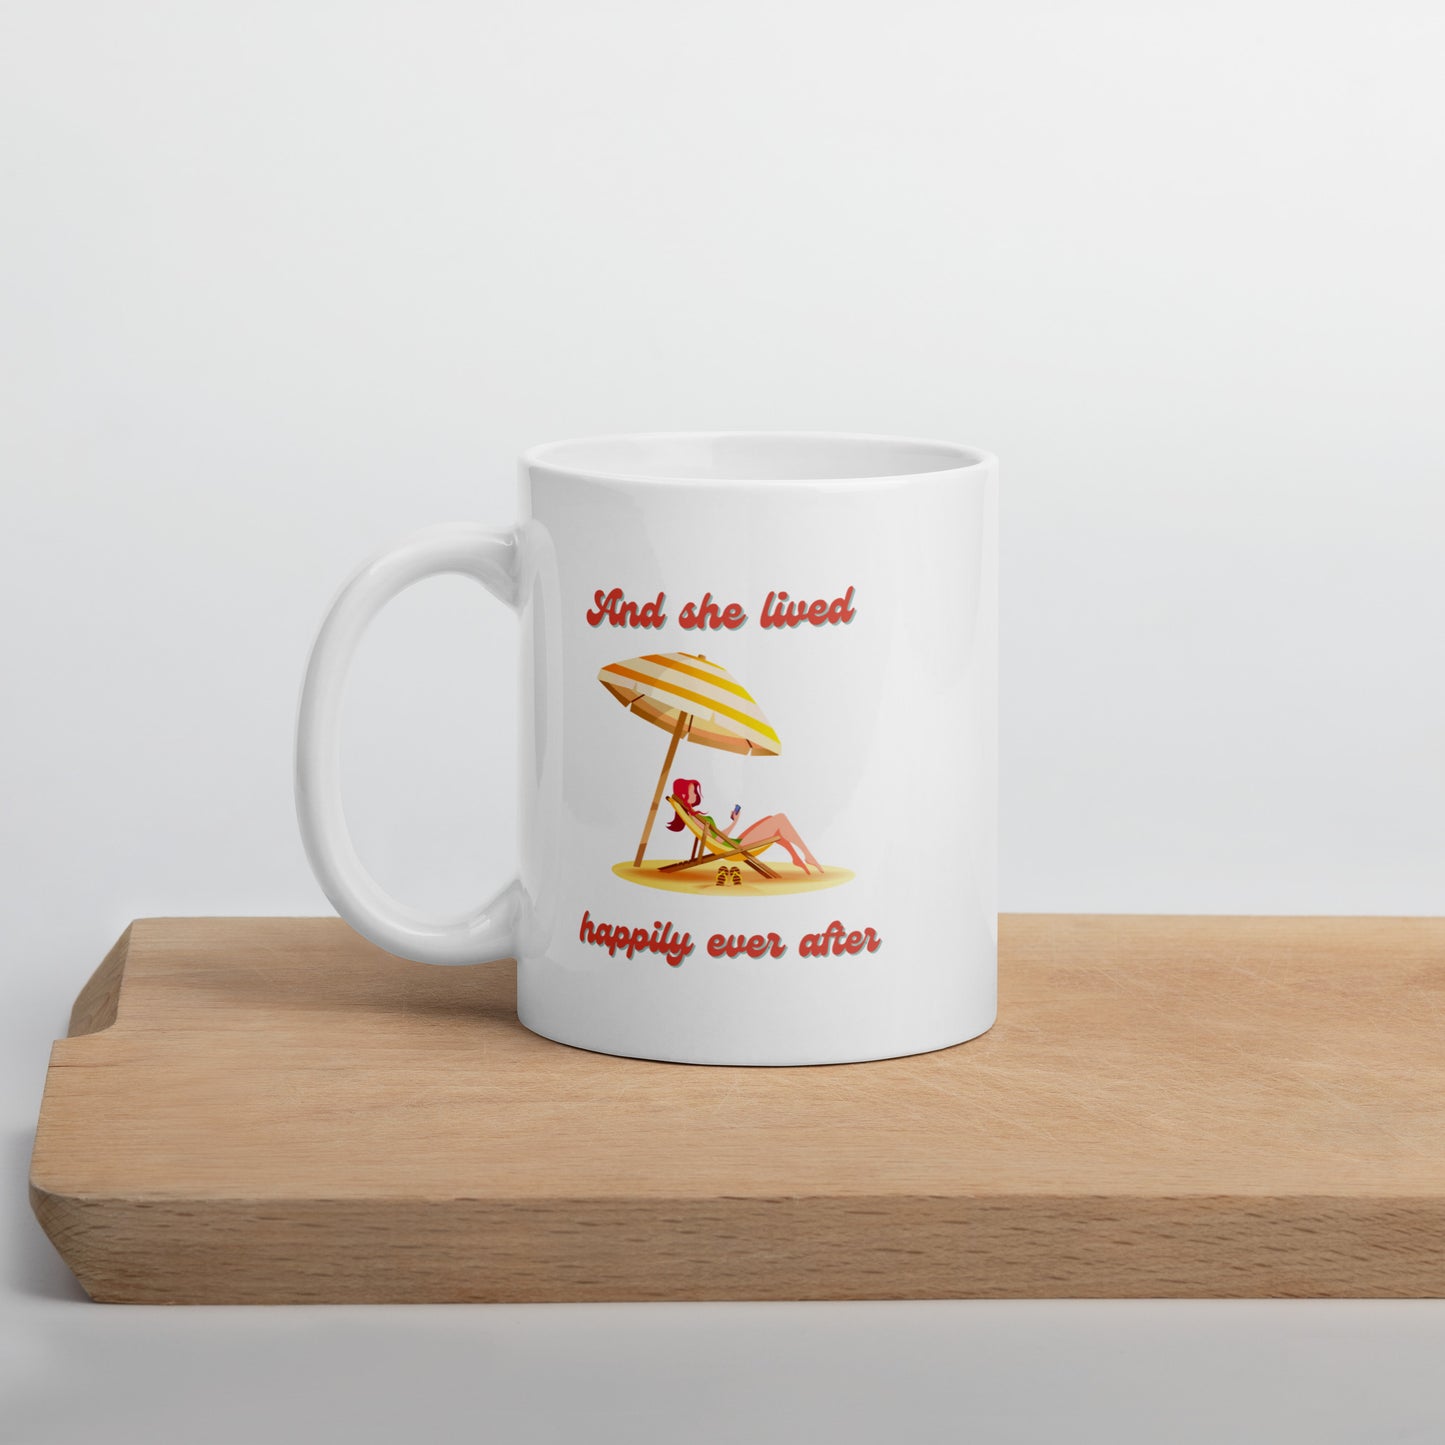 And she lived happily ever after, mug